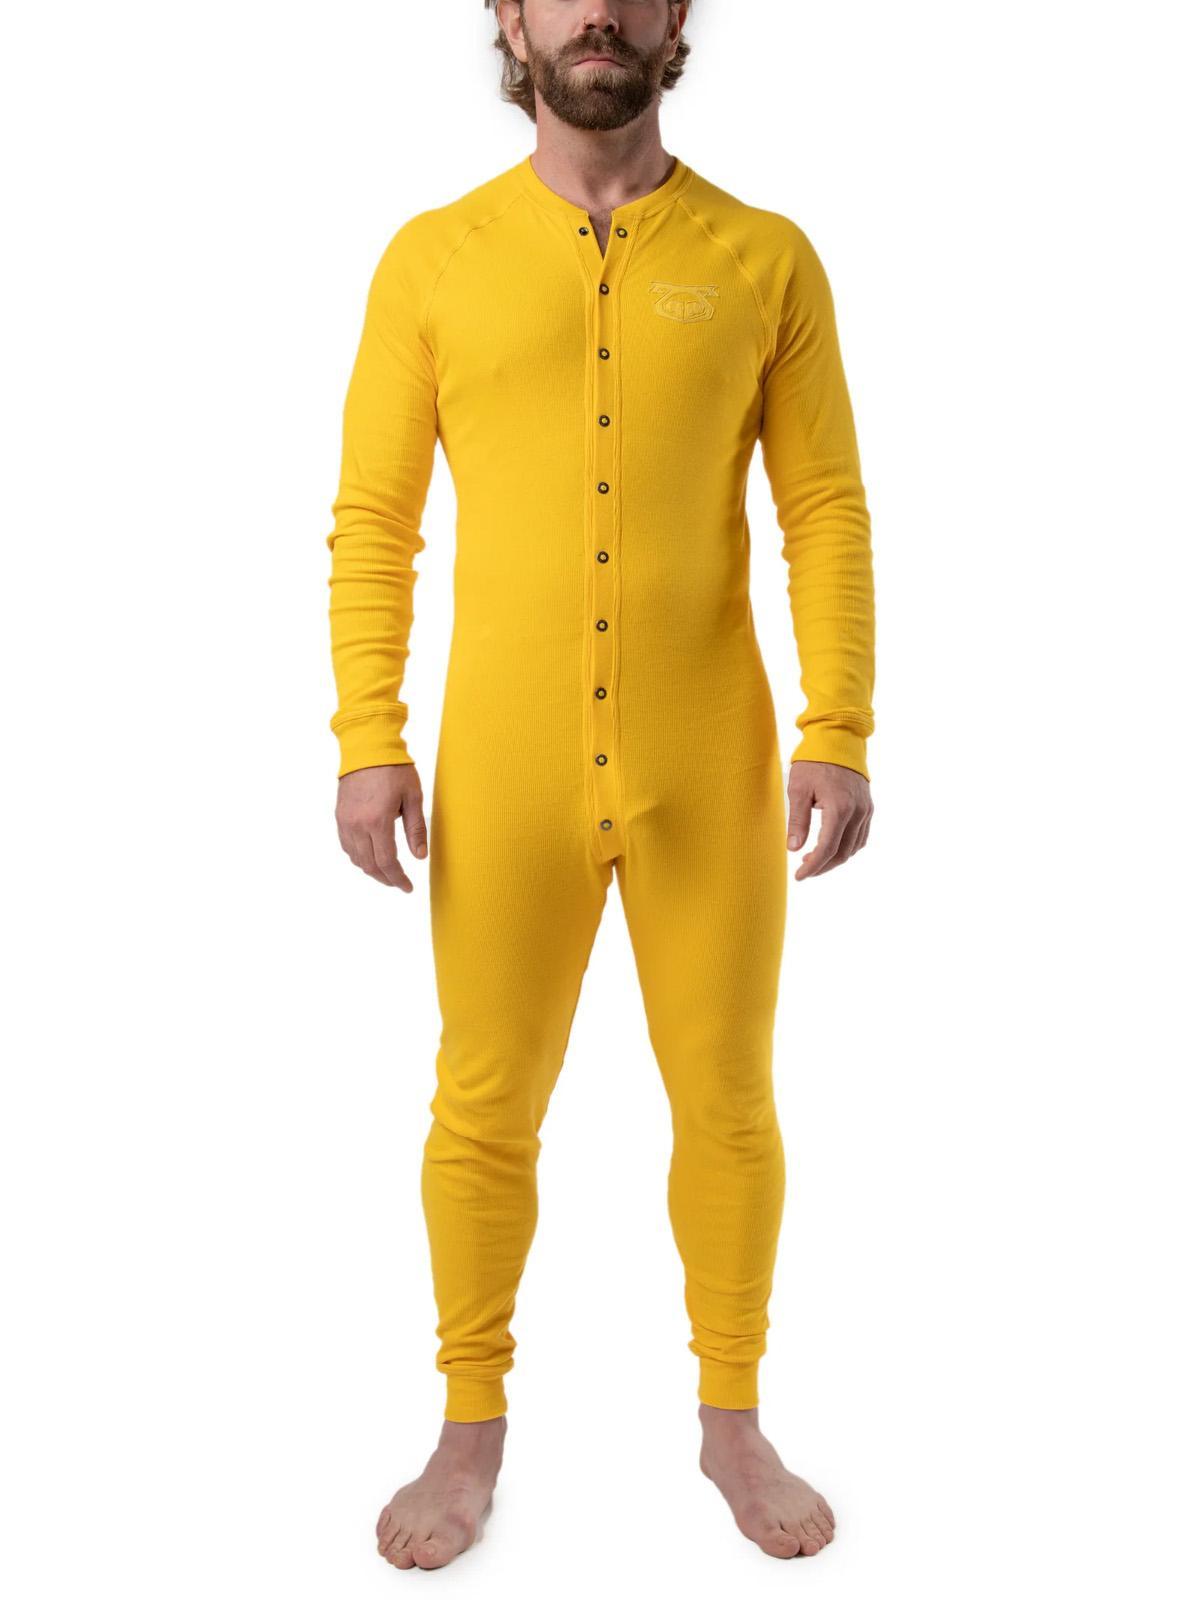 NASTY PIG UNION SUIT ELECTRIC YELLOW - FullKit.com